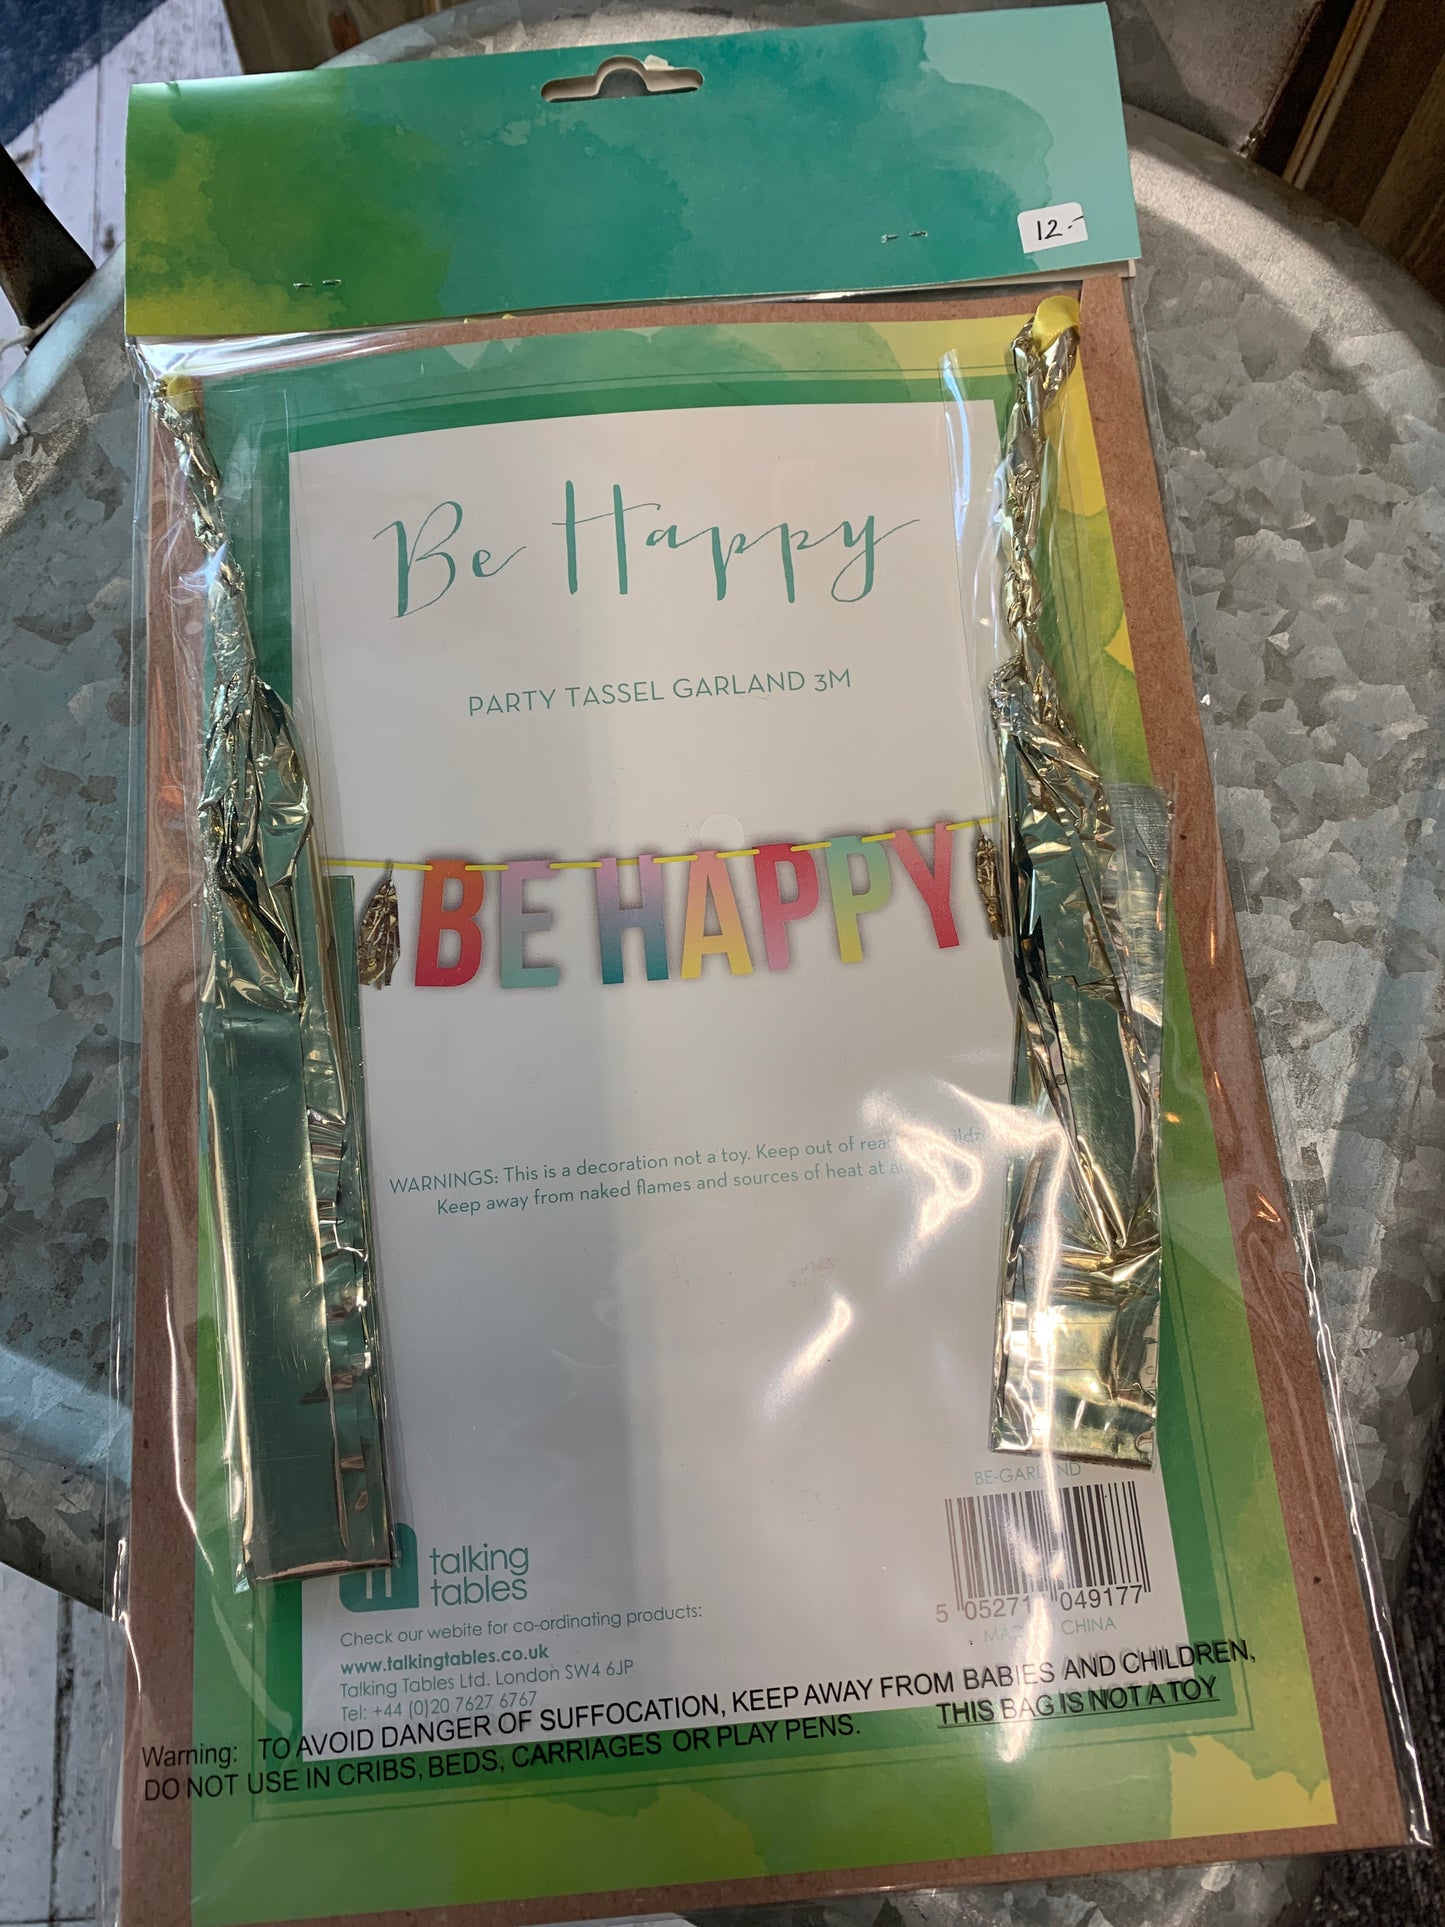 Multi-colored, hombre styled, party tasseled garland that spells out "Be Happy".